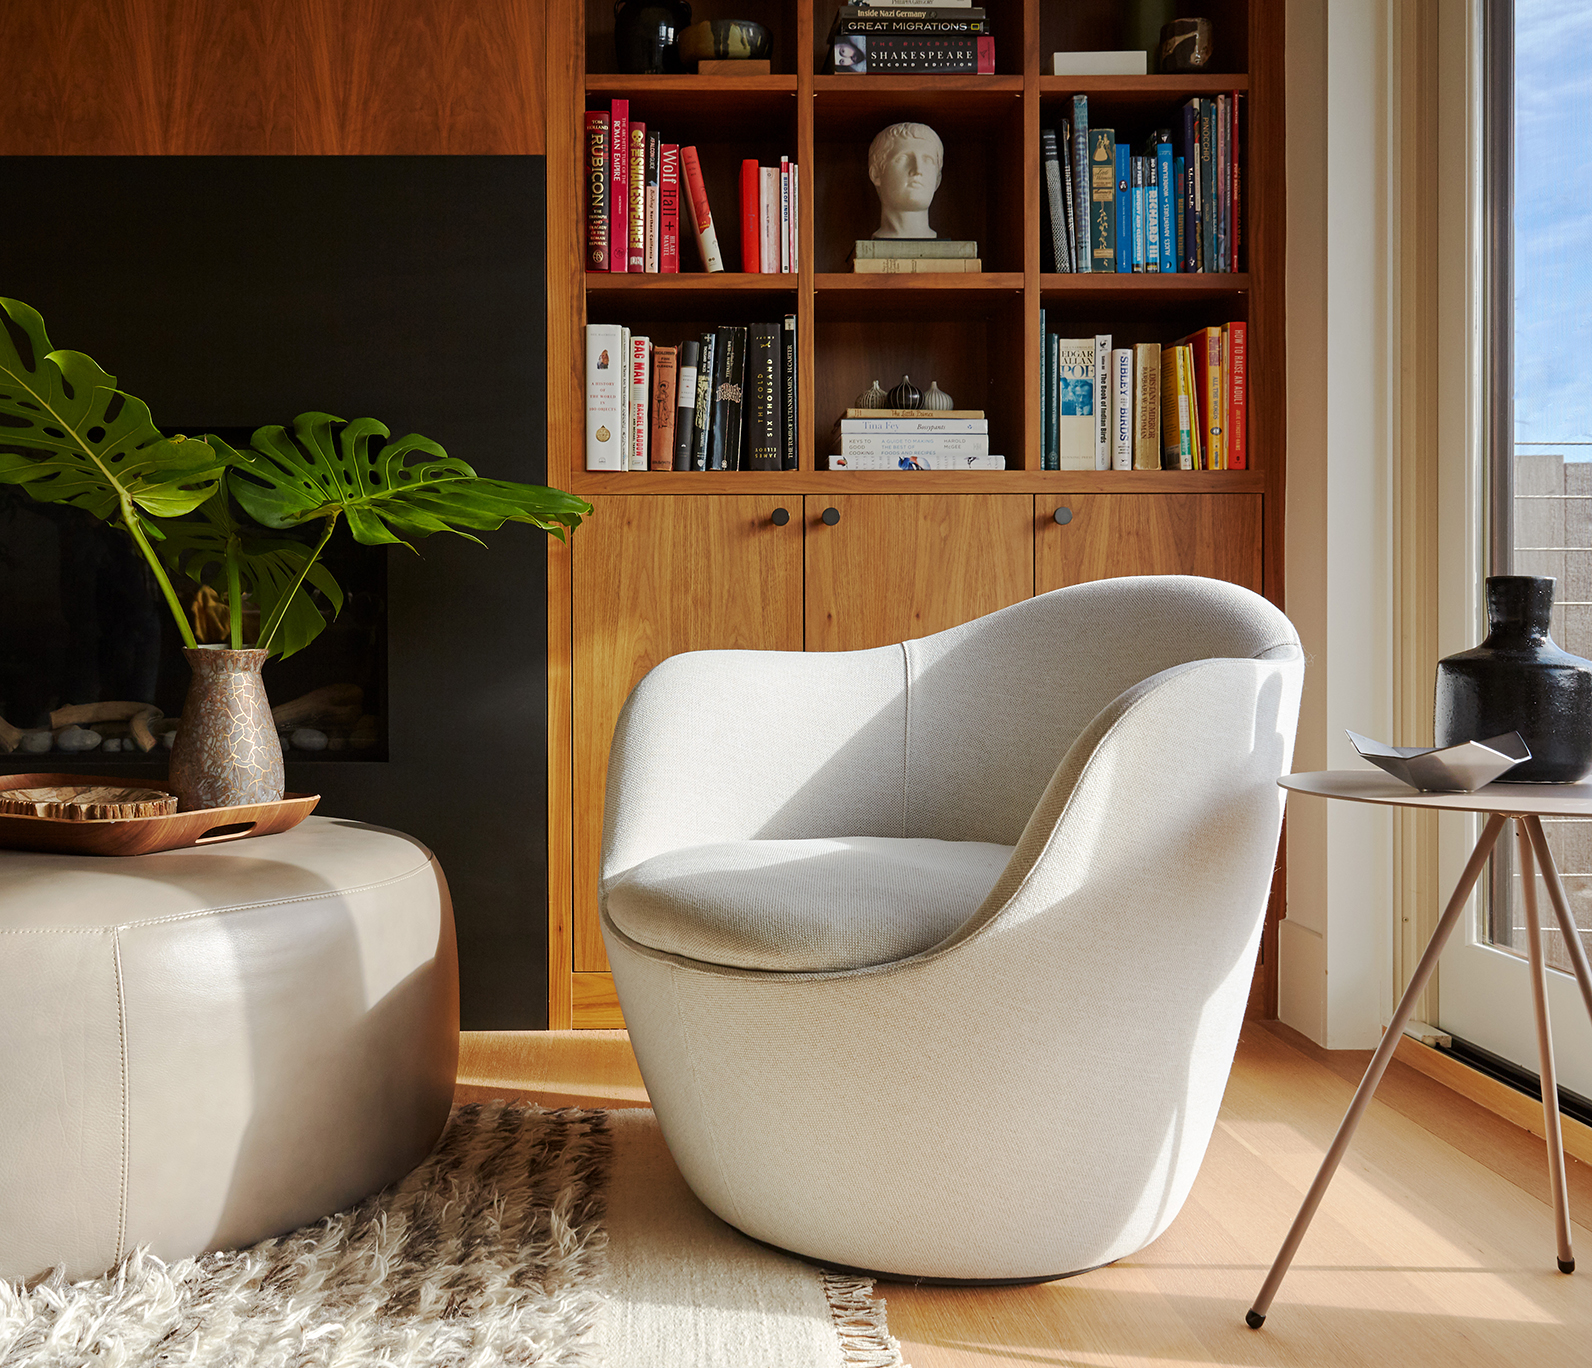 parkside nystrom design chair